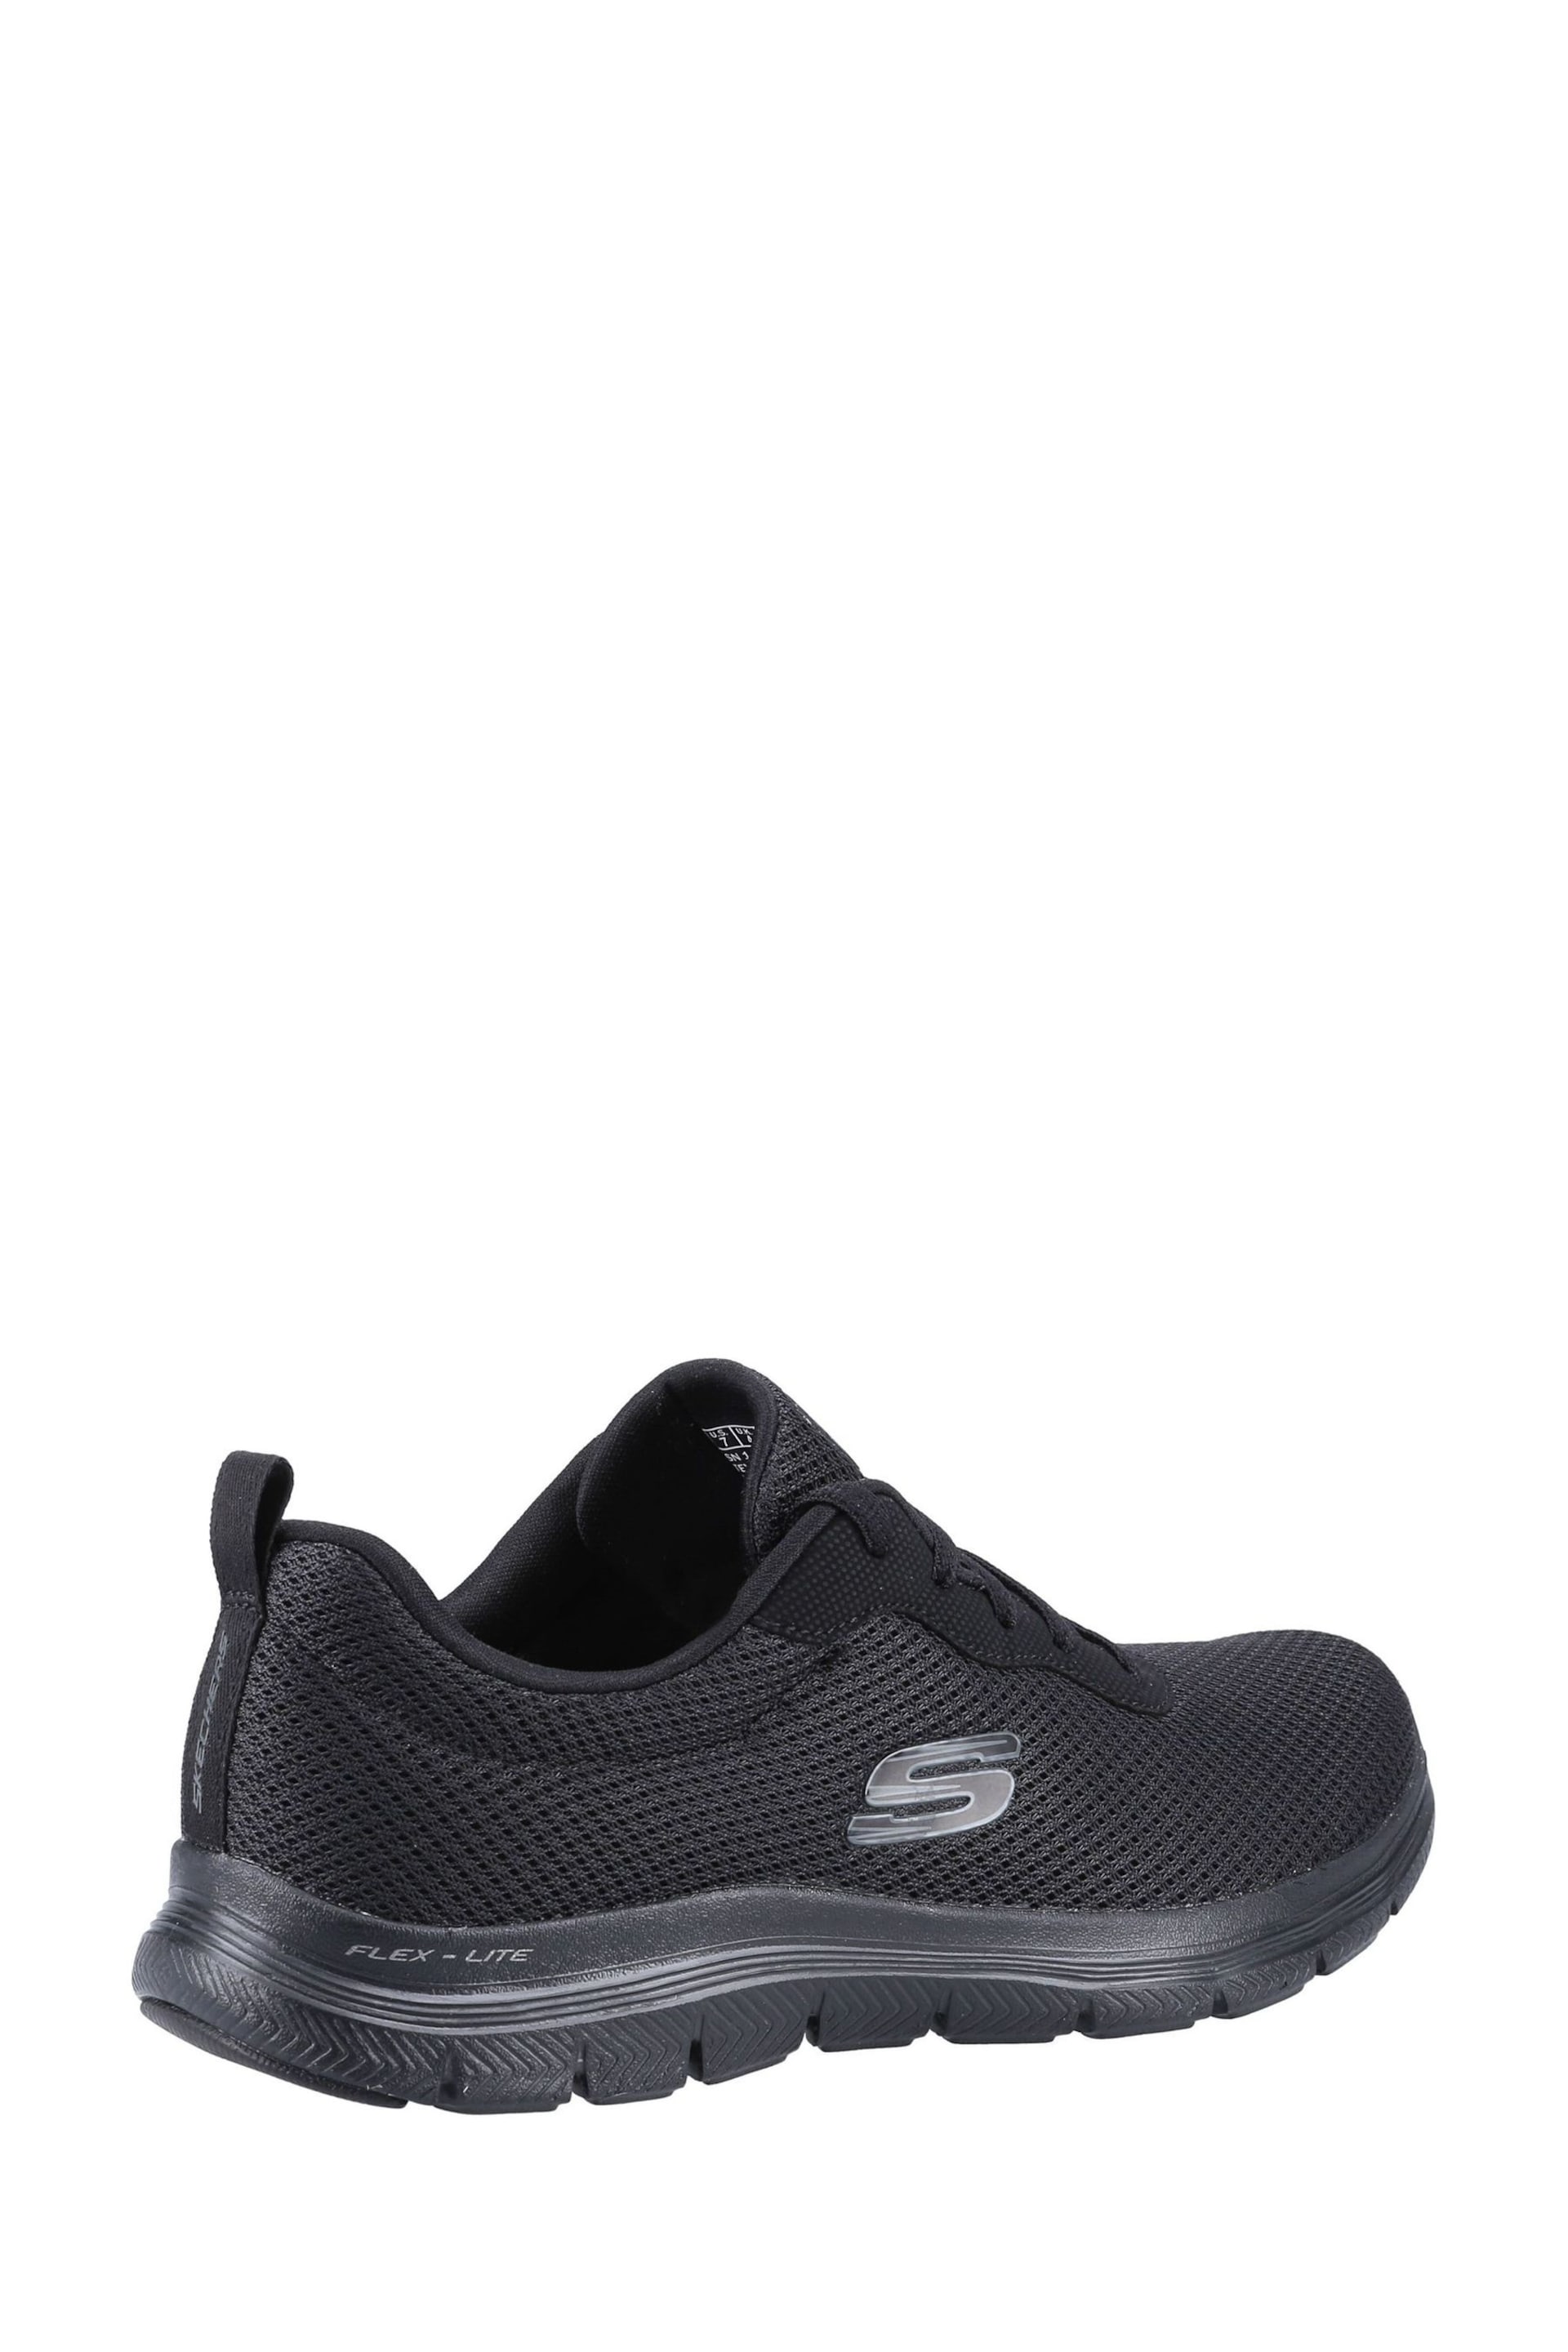 Skechers Black Flex Appeal 4.0 Brilliant View Womens Trainers - Image 3 of 8